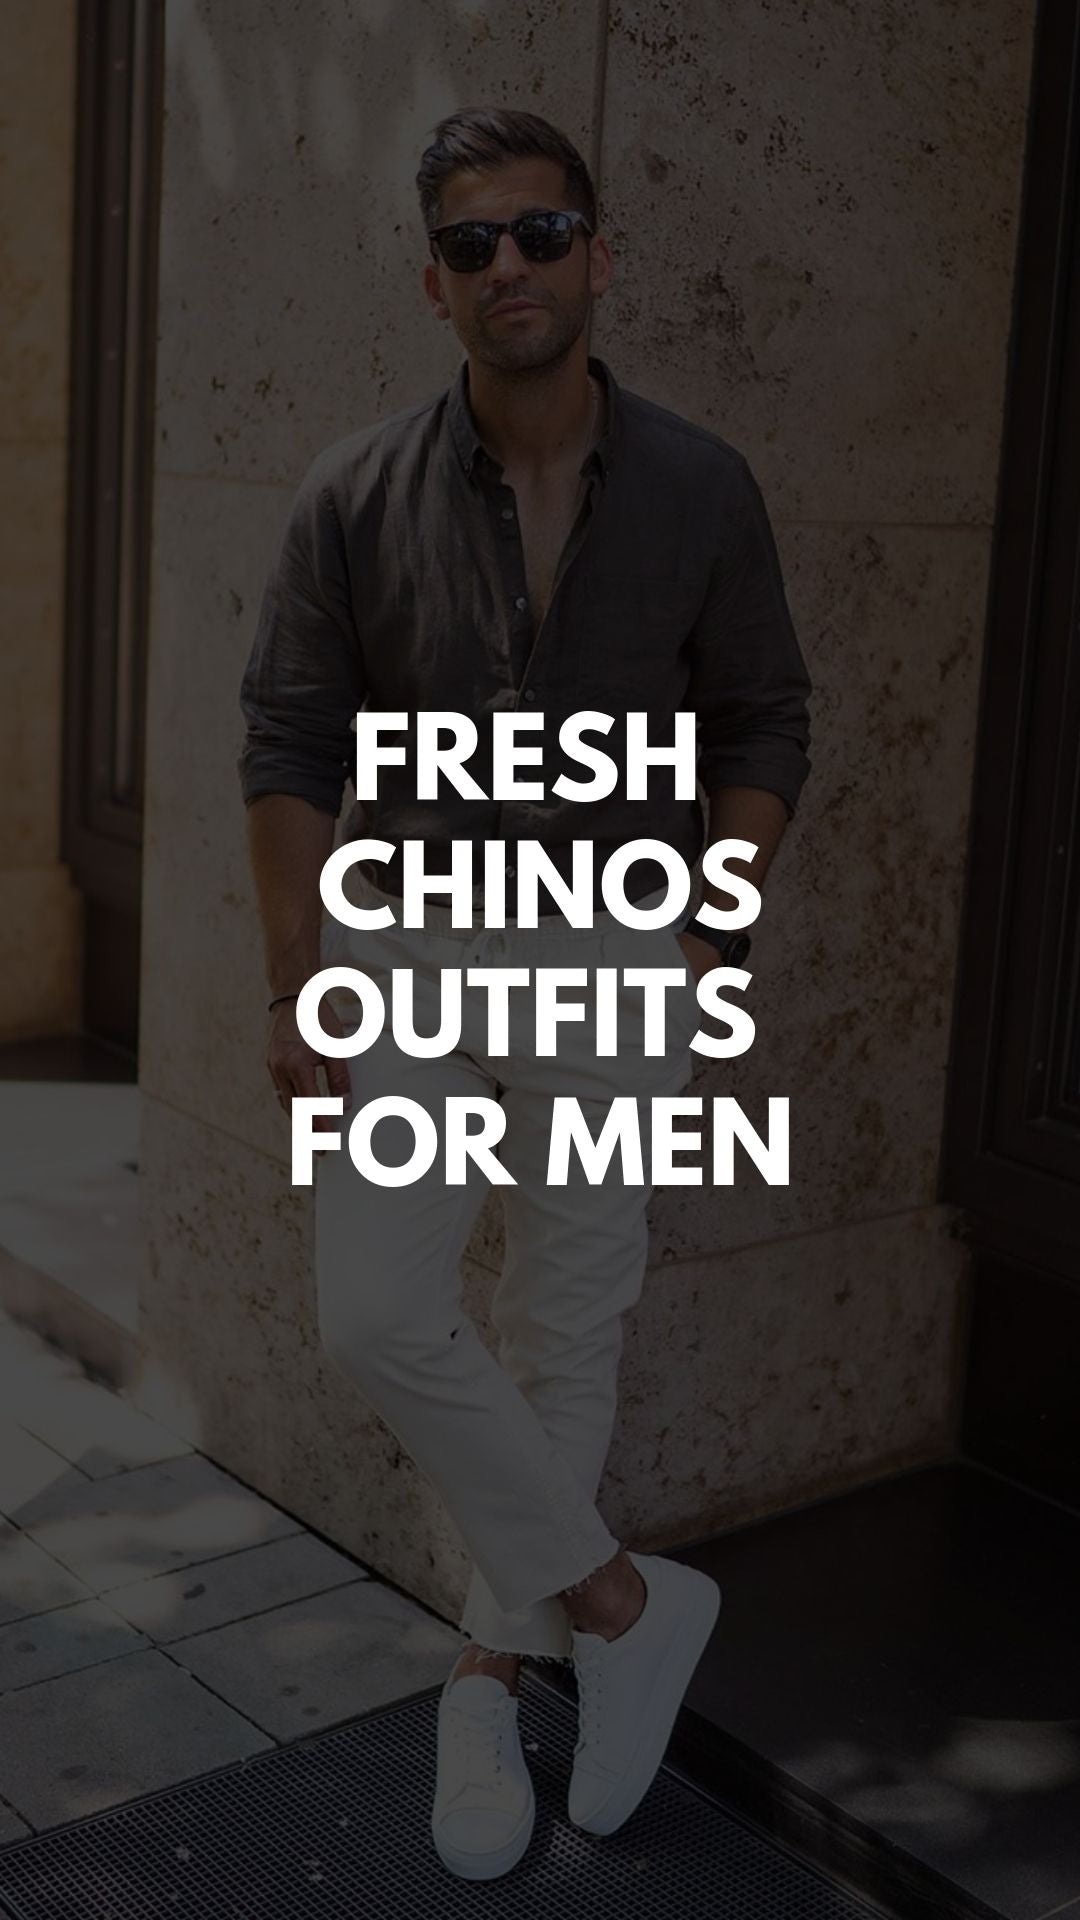 3 Fresh Chino Pants Outfits For Guys #chino #pants #outfits #mensfashion